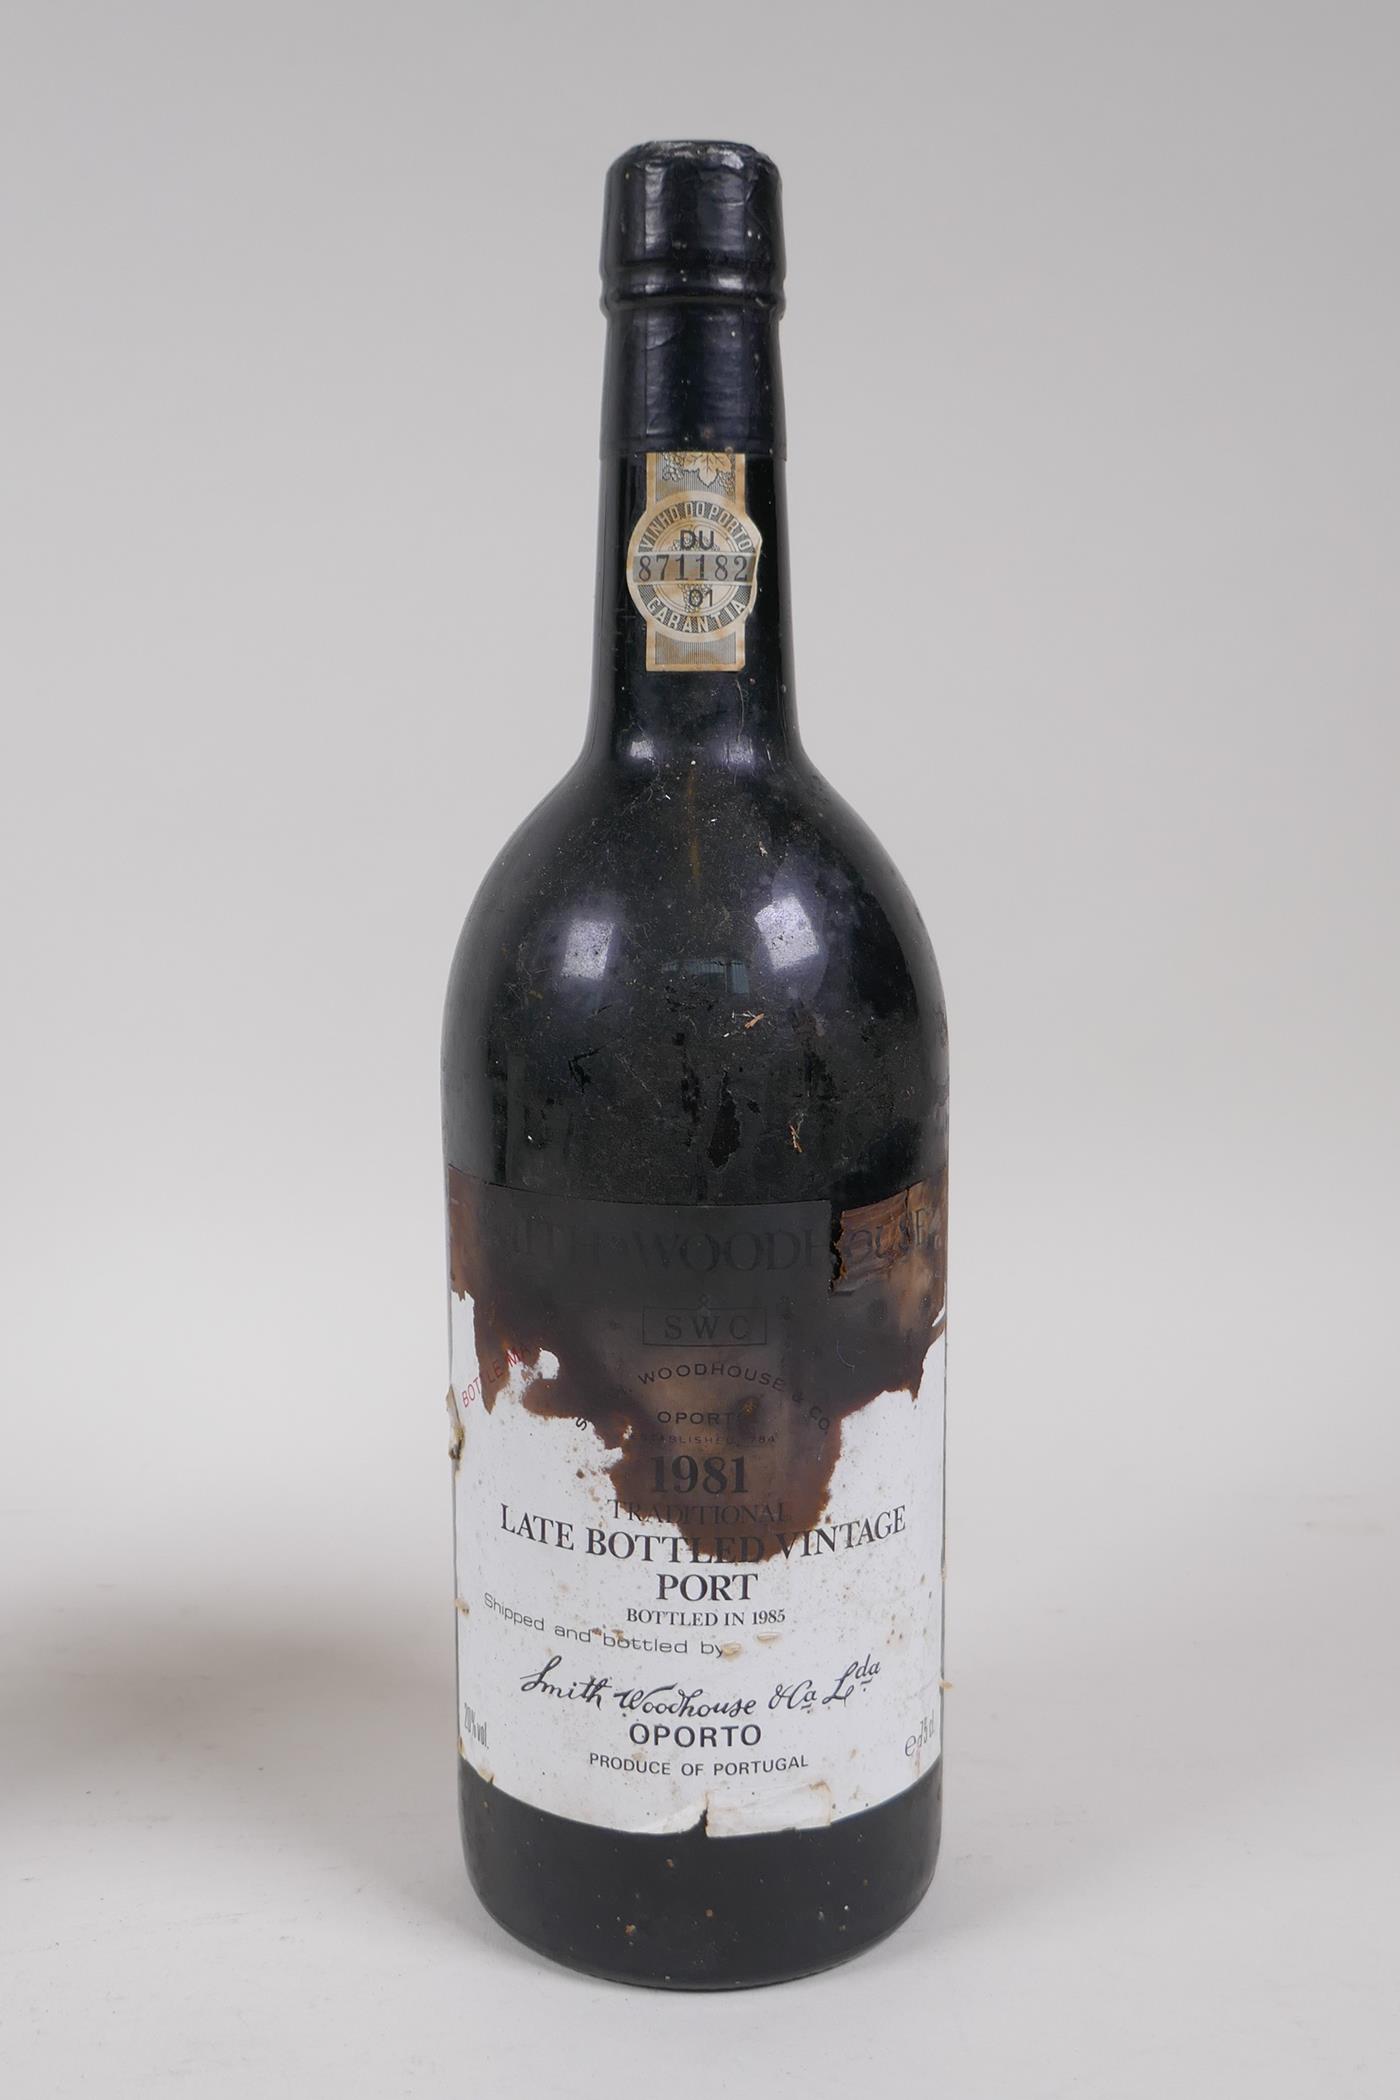 A bottle of Scholtz Hermanos Solern 1885 Malaga Wine, 0.75l, and a bottle of Smith Woodhouse 1981 - Image 5 of 7